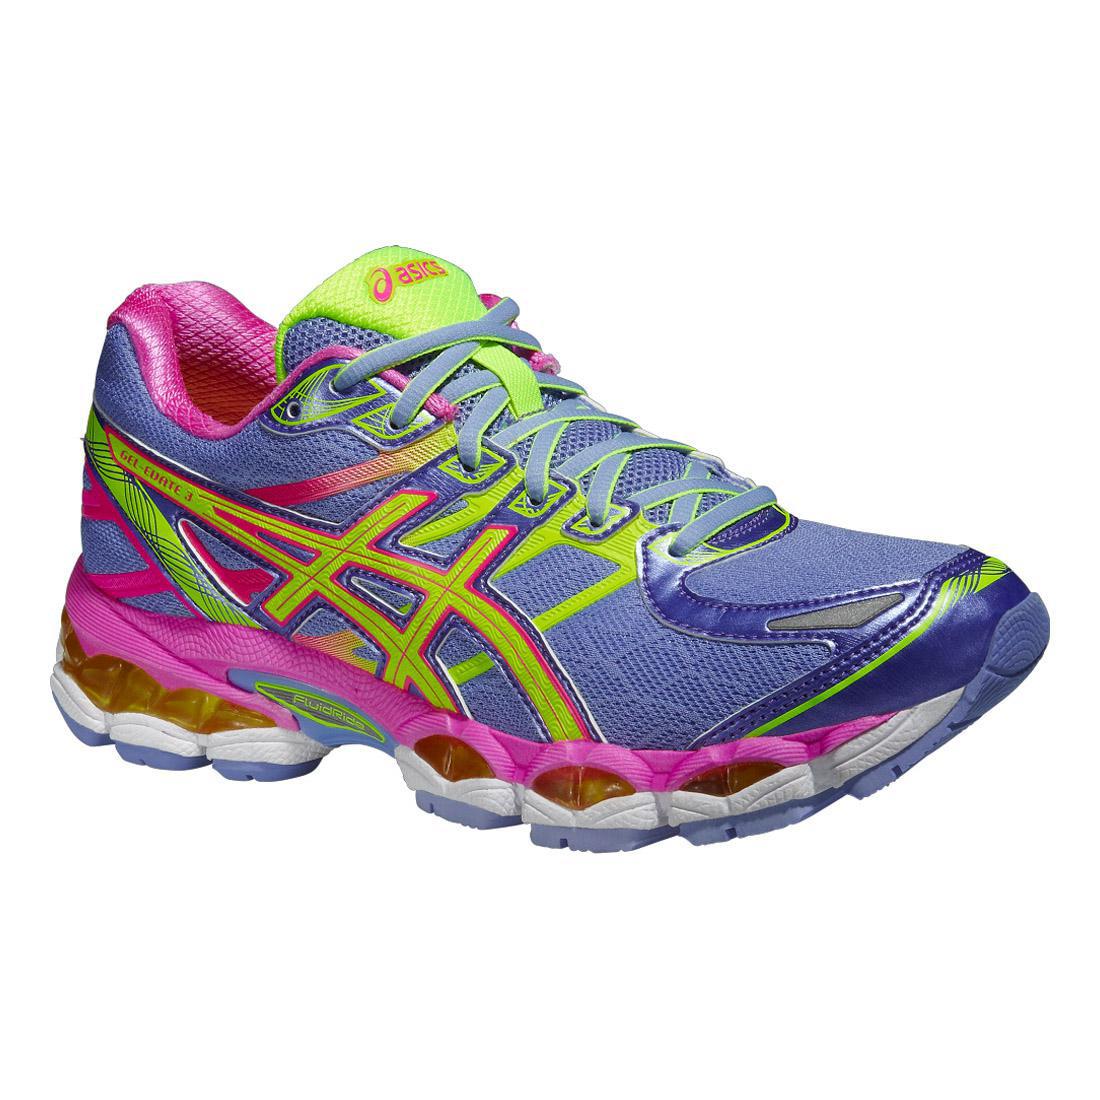 Asics Womens GEL-Evate 3 Running Shoes - Lavender/Yellow ...